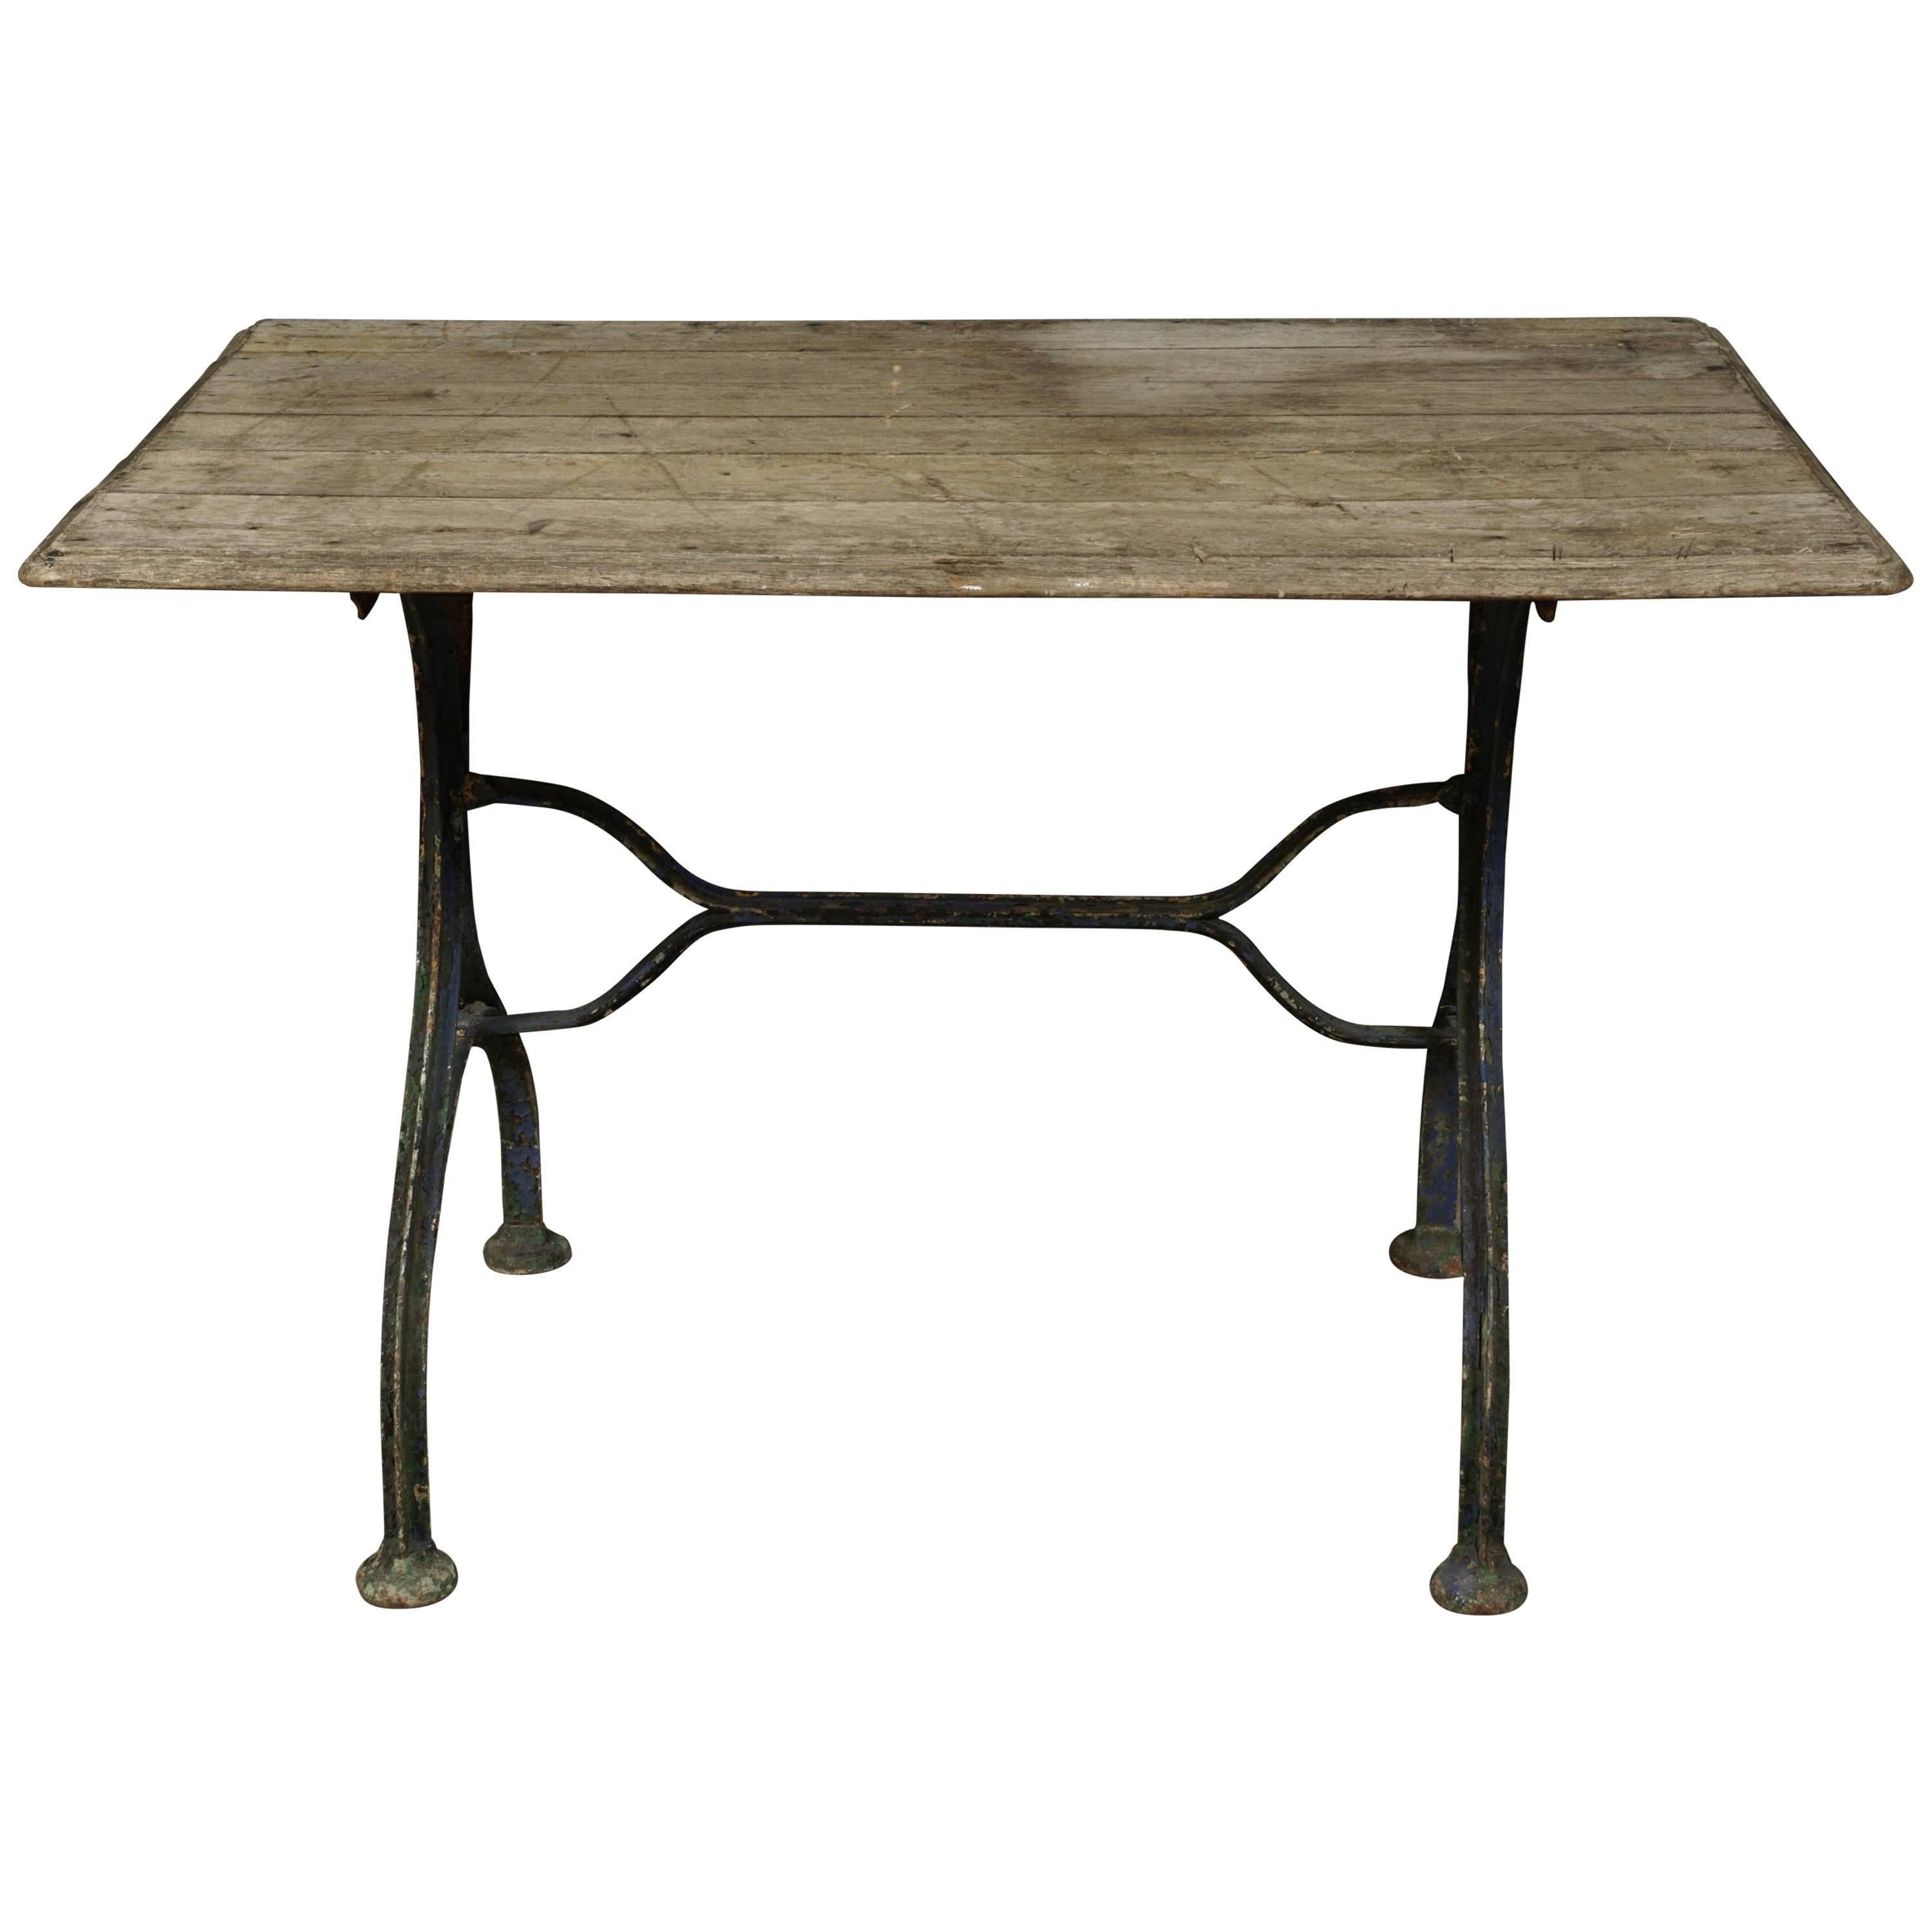 Early Bistro Table from France, circa 1920